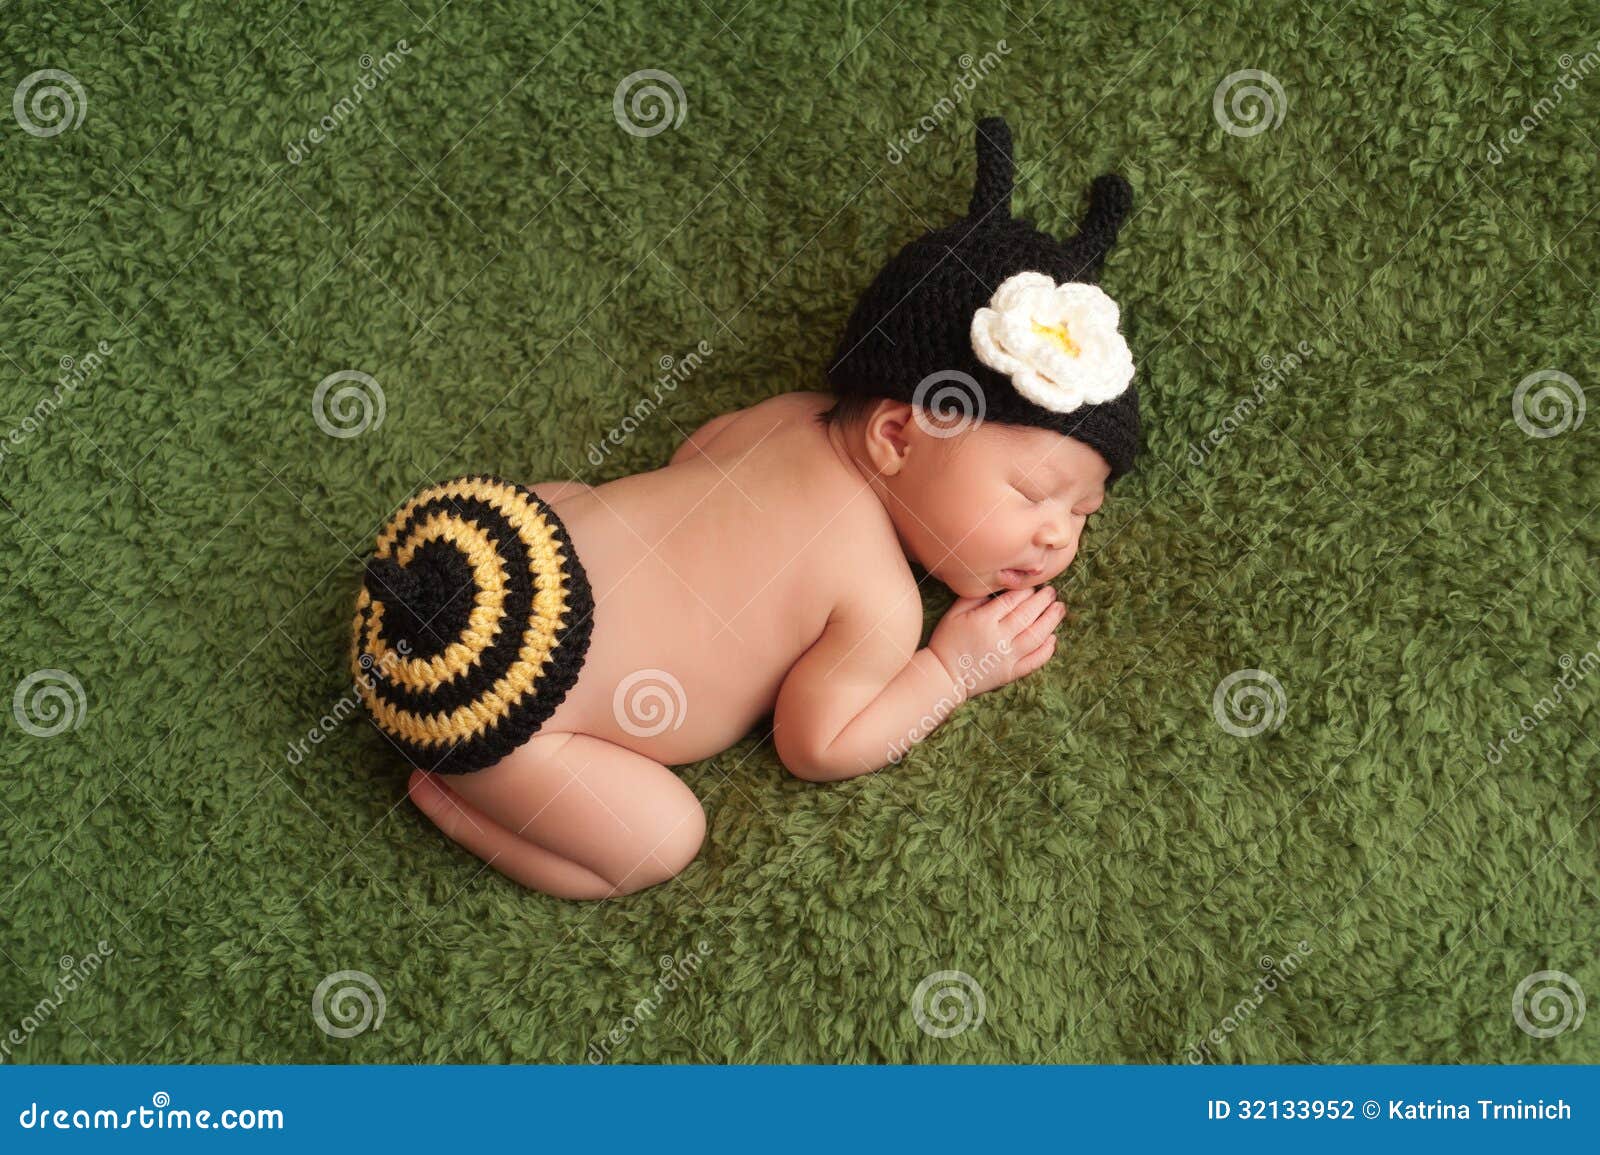 1,000 Baby Bee Costume Royalty-Free Images, Stock Photos & Pictures